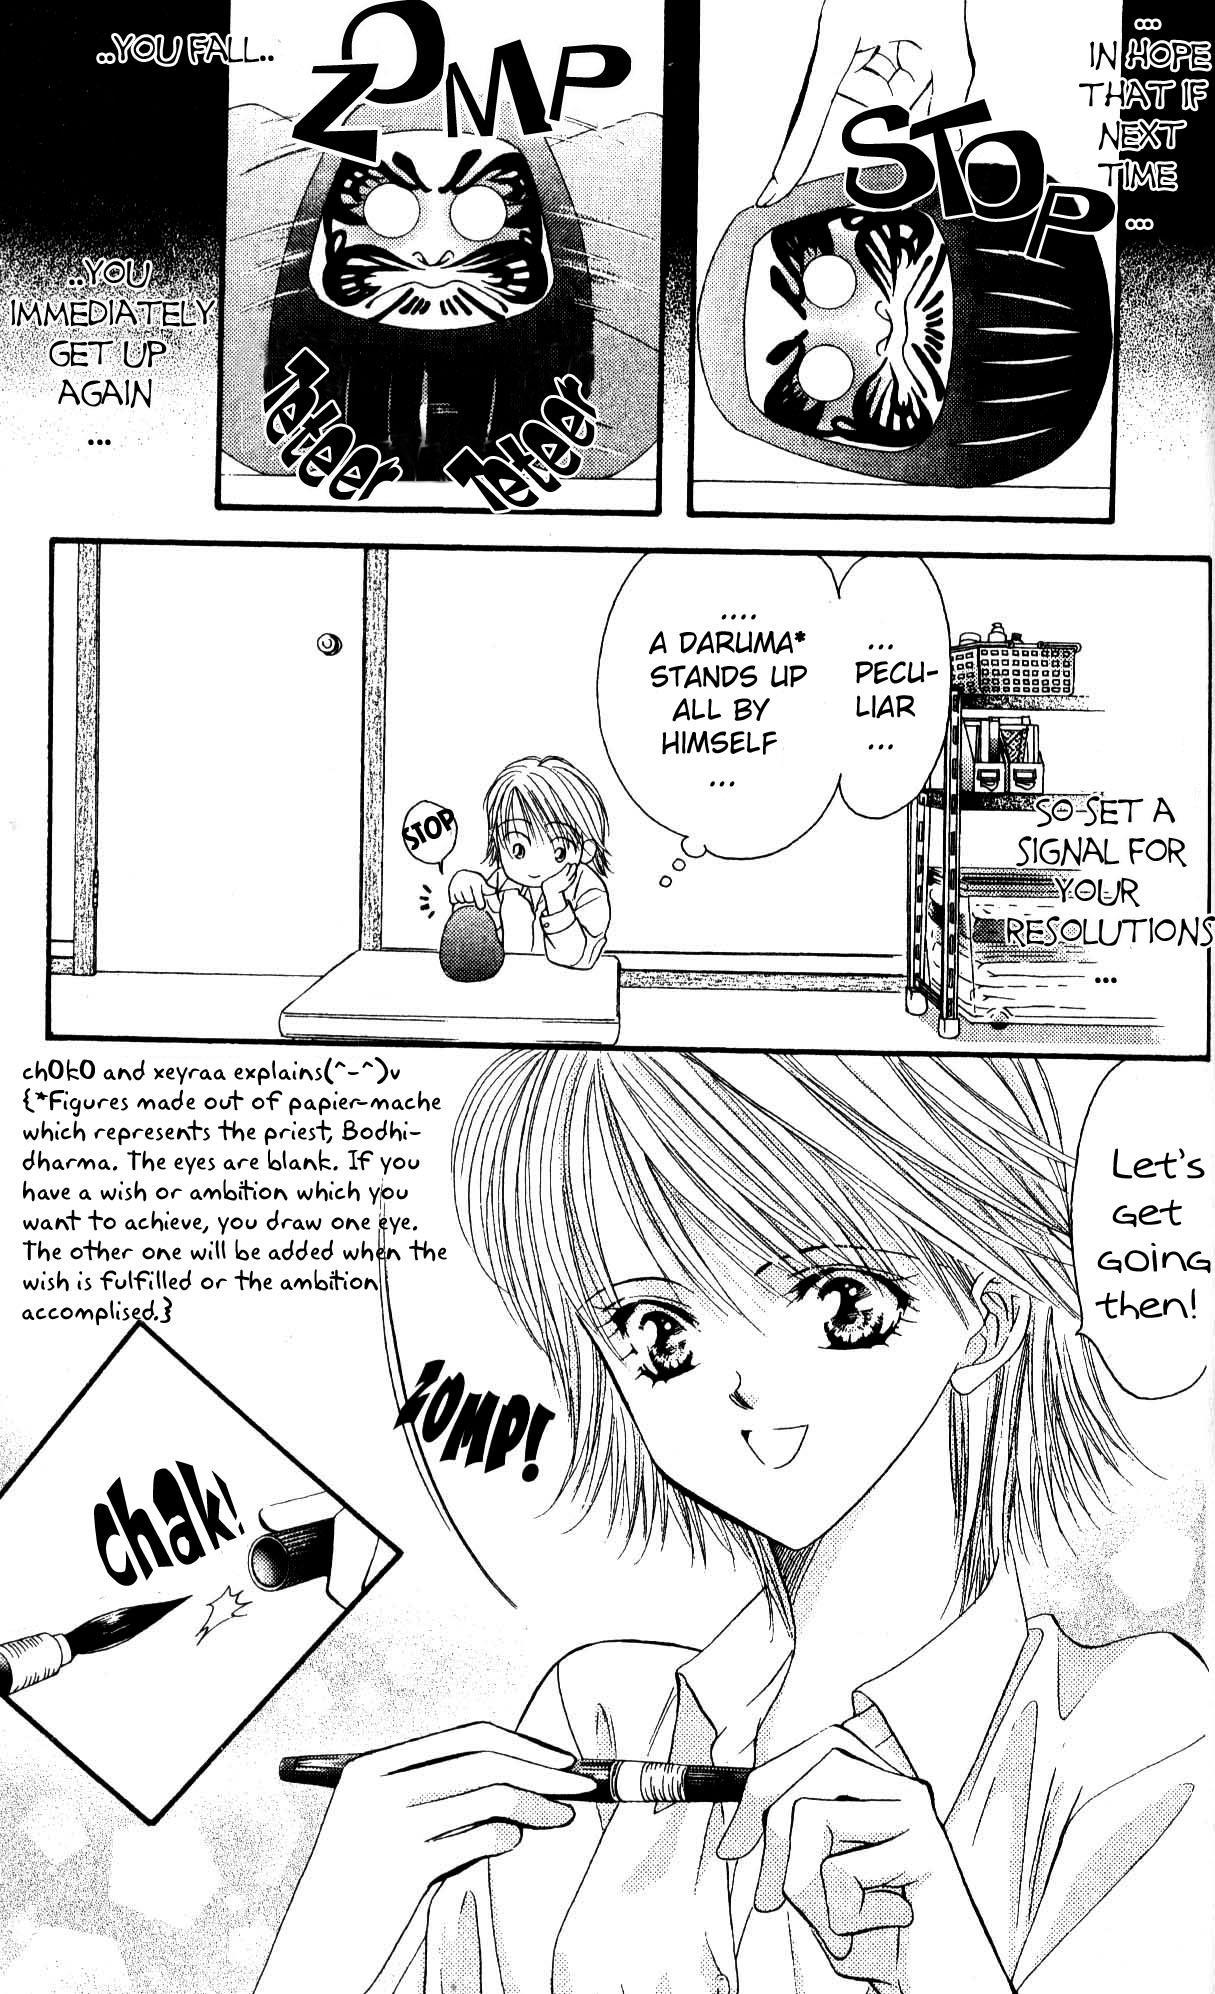 Skip Beat!, Chapter 7 That Name is Taboo image 03